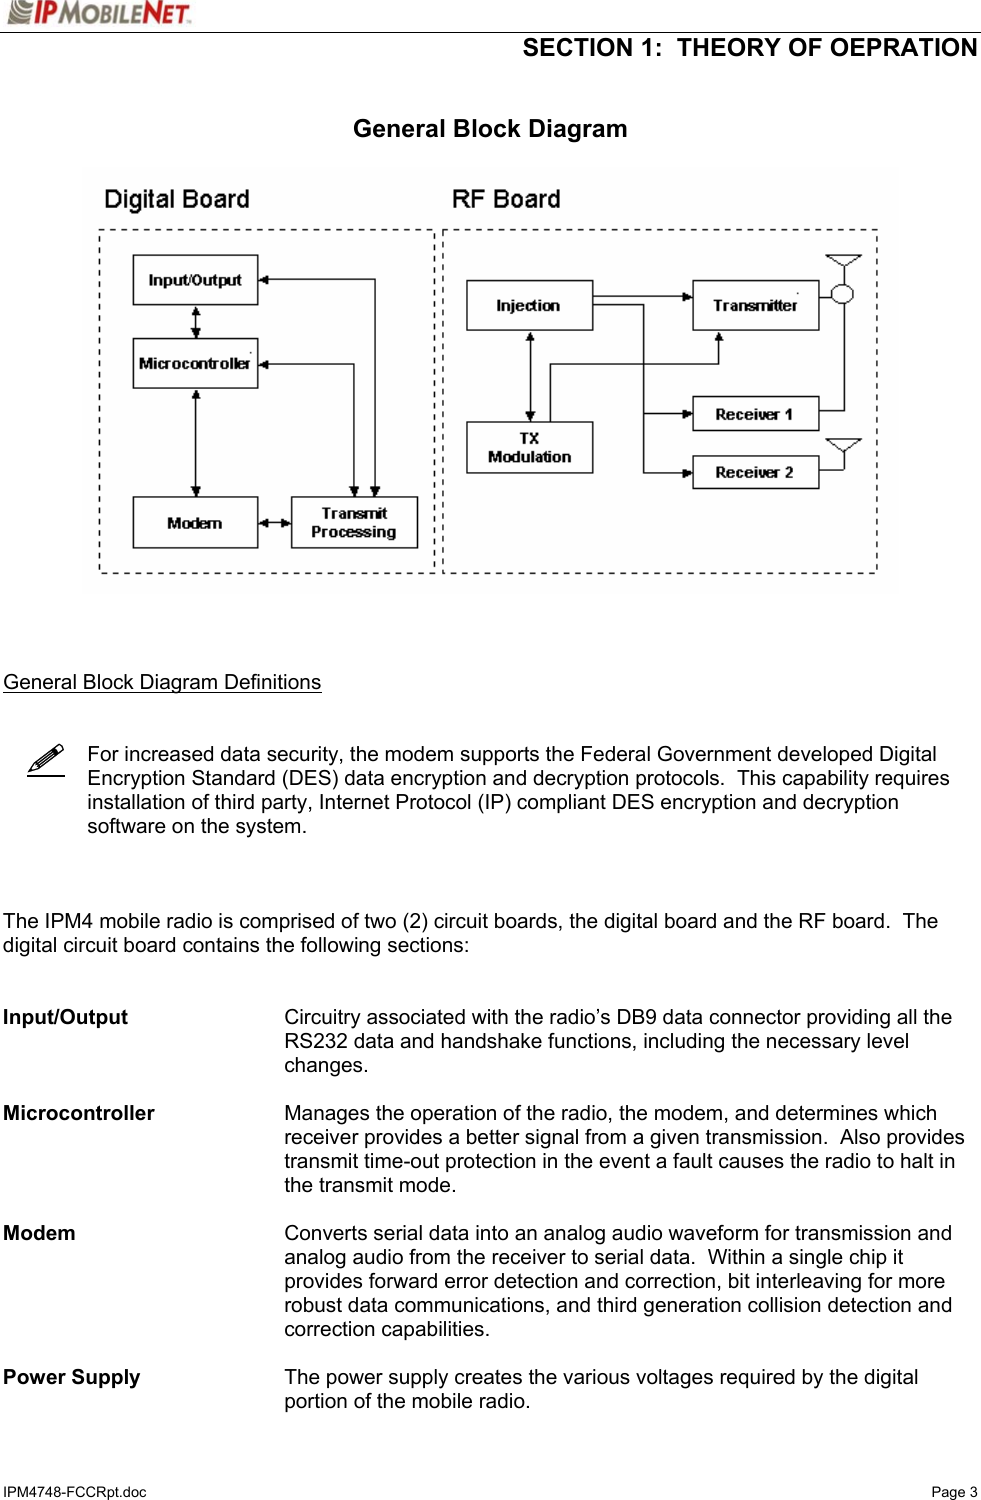   SECTION 1:  THEORY OF OEPRATION  IPM4748-FCCRpt.doc   Page 3    General Block Diagram      General Block Diagram Definitions       For increased data security, the modem supports the Federal Government developed Digital Encryption Standard (DES) data encryption and decryption protocols.  This capability requires installation of third party, Internet Protocol (IP) compliant DES encryption and decryption software on the system.    The IPM4 mobile radio is comprised of two (2) circuit boards, the digital board and the RF board.  The digital circuit board contains the following sections:   Input/Output  Circuitry associated with the radio’s DB9 data connector providing all the RS232 data and handshake functions, including the necessary level changes.   Microcontroller  Manages the operation of the radio, the modem, and determines which receiver provides a better signal from a given transmission.  Also provides transmit time-out protection in the event a fault causes the radio to halt in the transmit mode.  Modem  Converts serial data into an analog audio waveform for transmission and analog audio from the receiver to serial data.  Within a single chip it provides forward error detection and correction, bit interleaving for more robust data communications, and third generation collision detection and correction capabilities.  Power Supply  The power supply creates the various voltages required by the digital portion of the mobile radio.